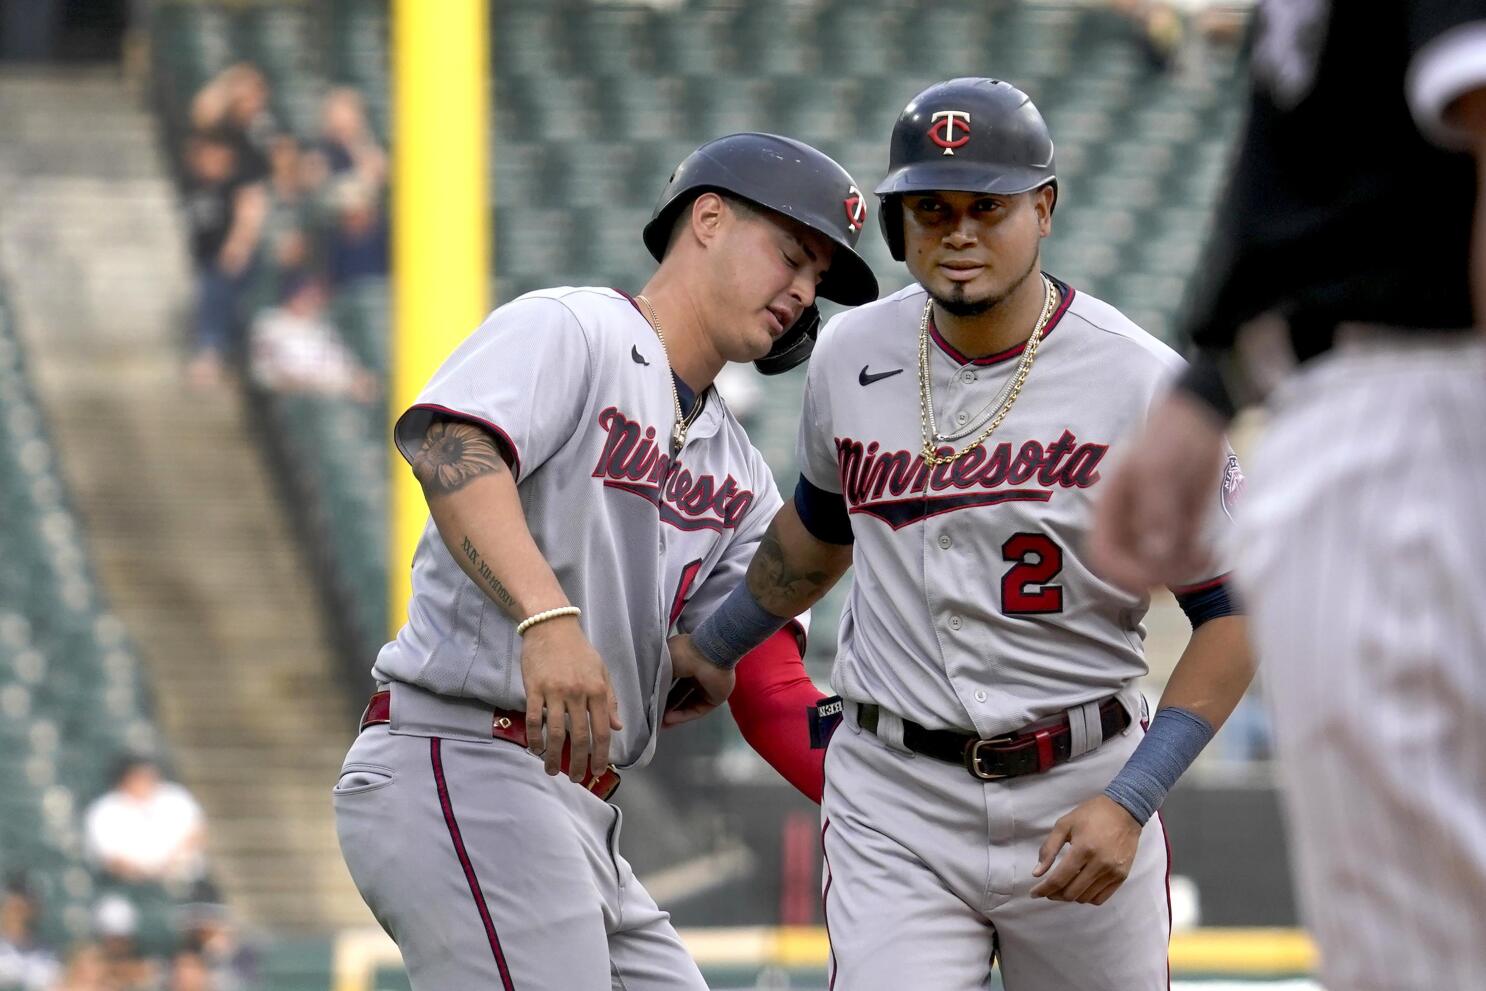 Minnesota Twins: The Top 5 Right Fielders in Franchise History